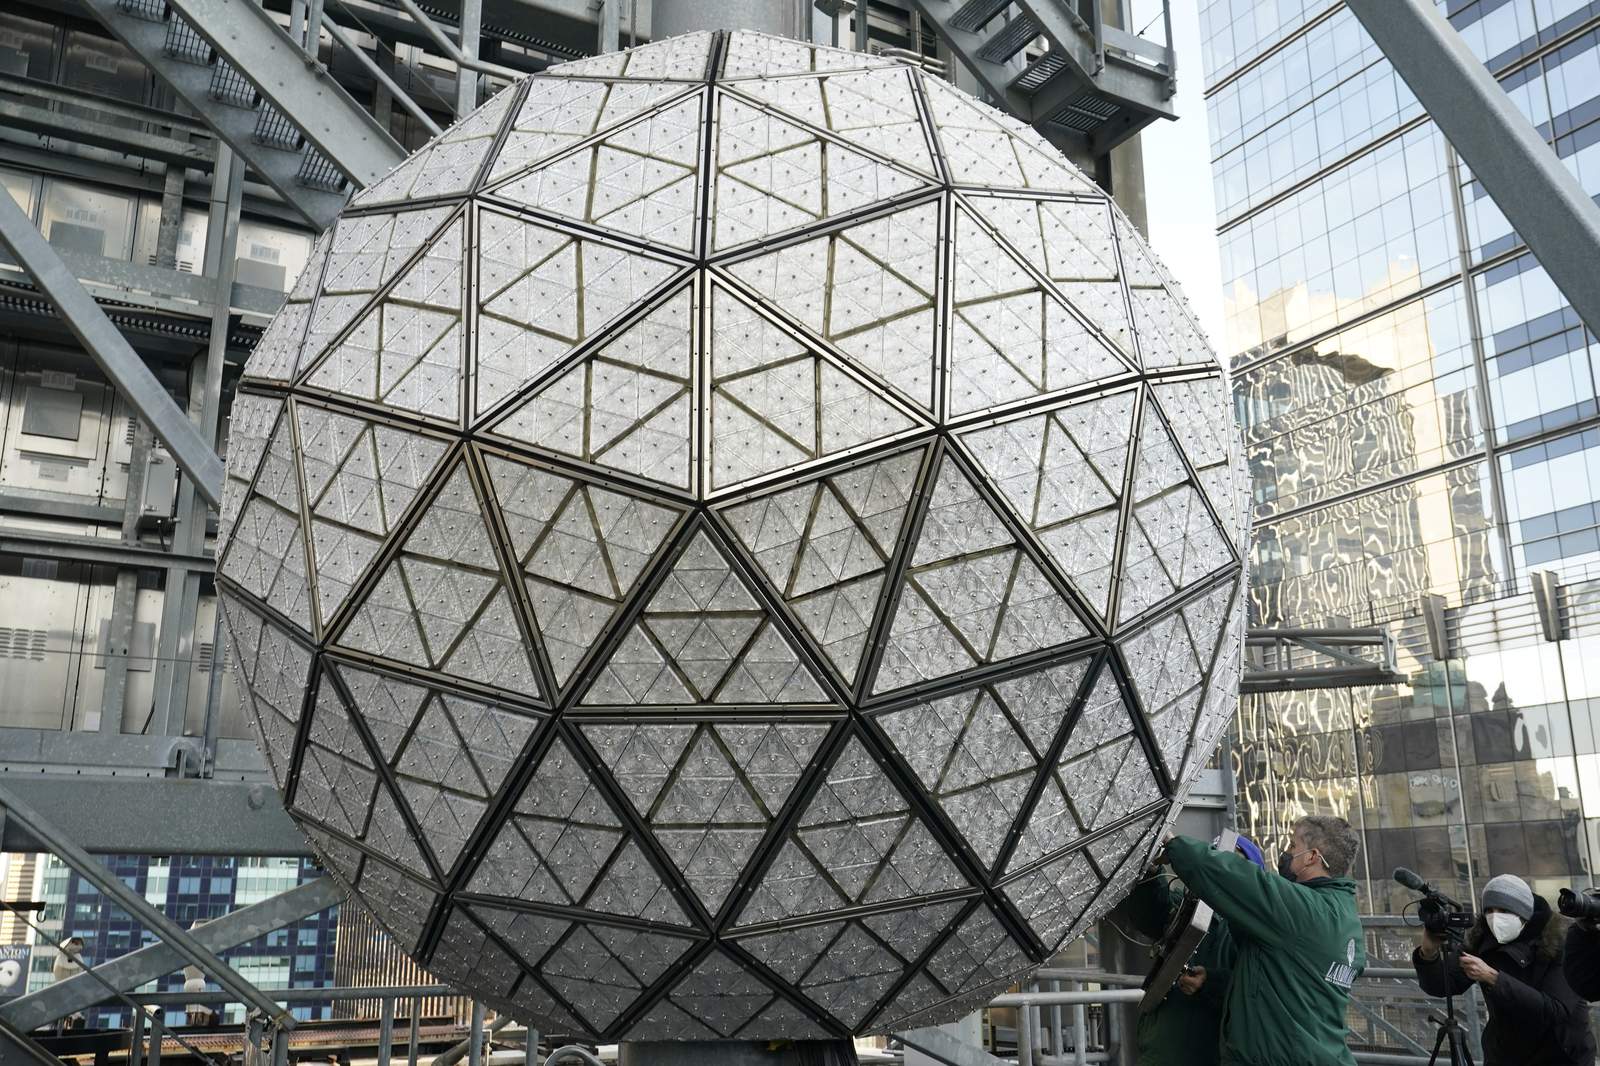 LIVE COVERAGE: 2021 New Year’s Eve Times Square Ball Drop virtual event